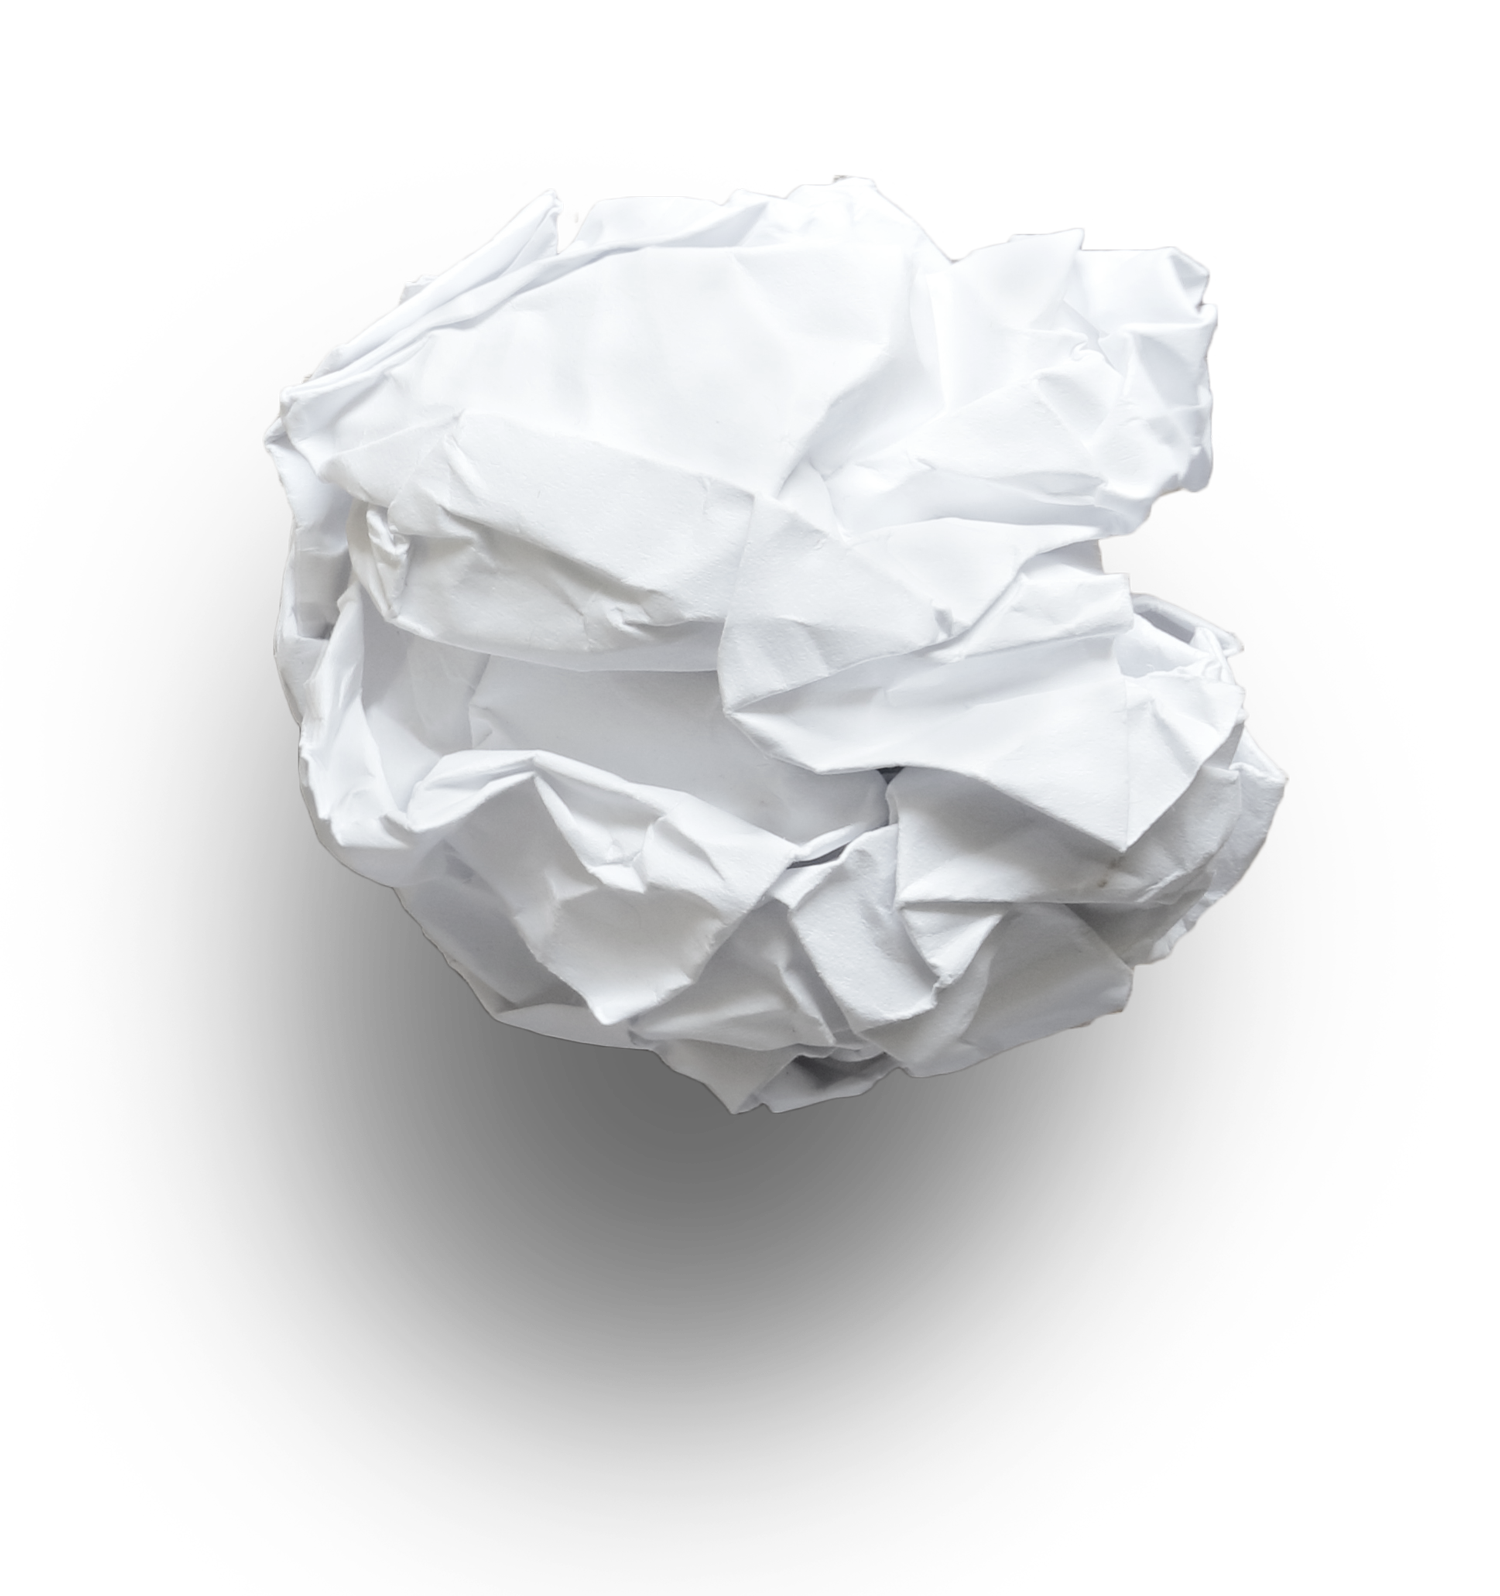 Forget the crumpled balls of paper